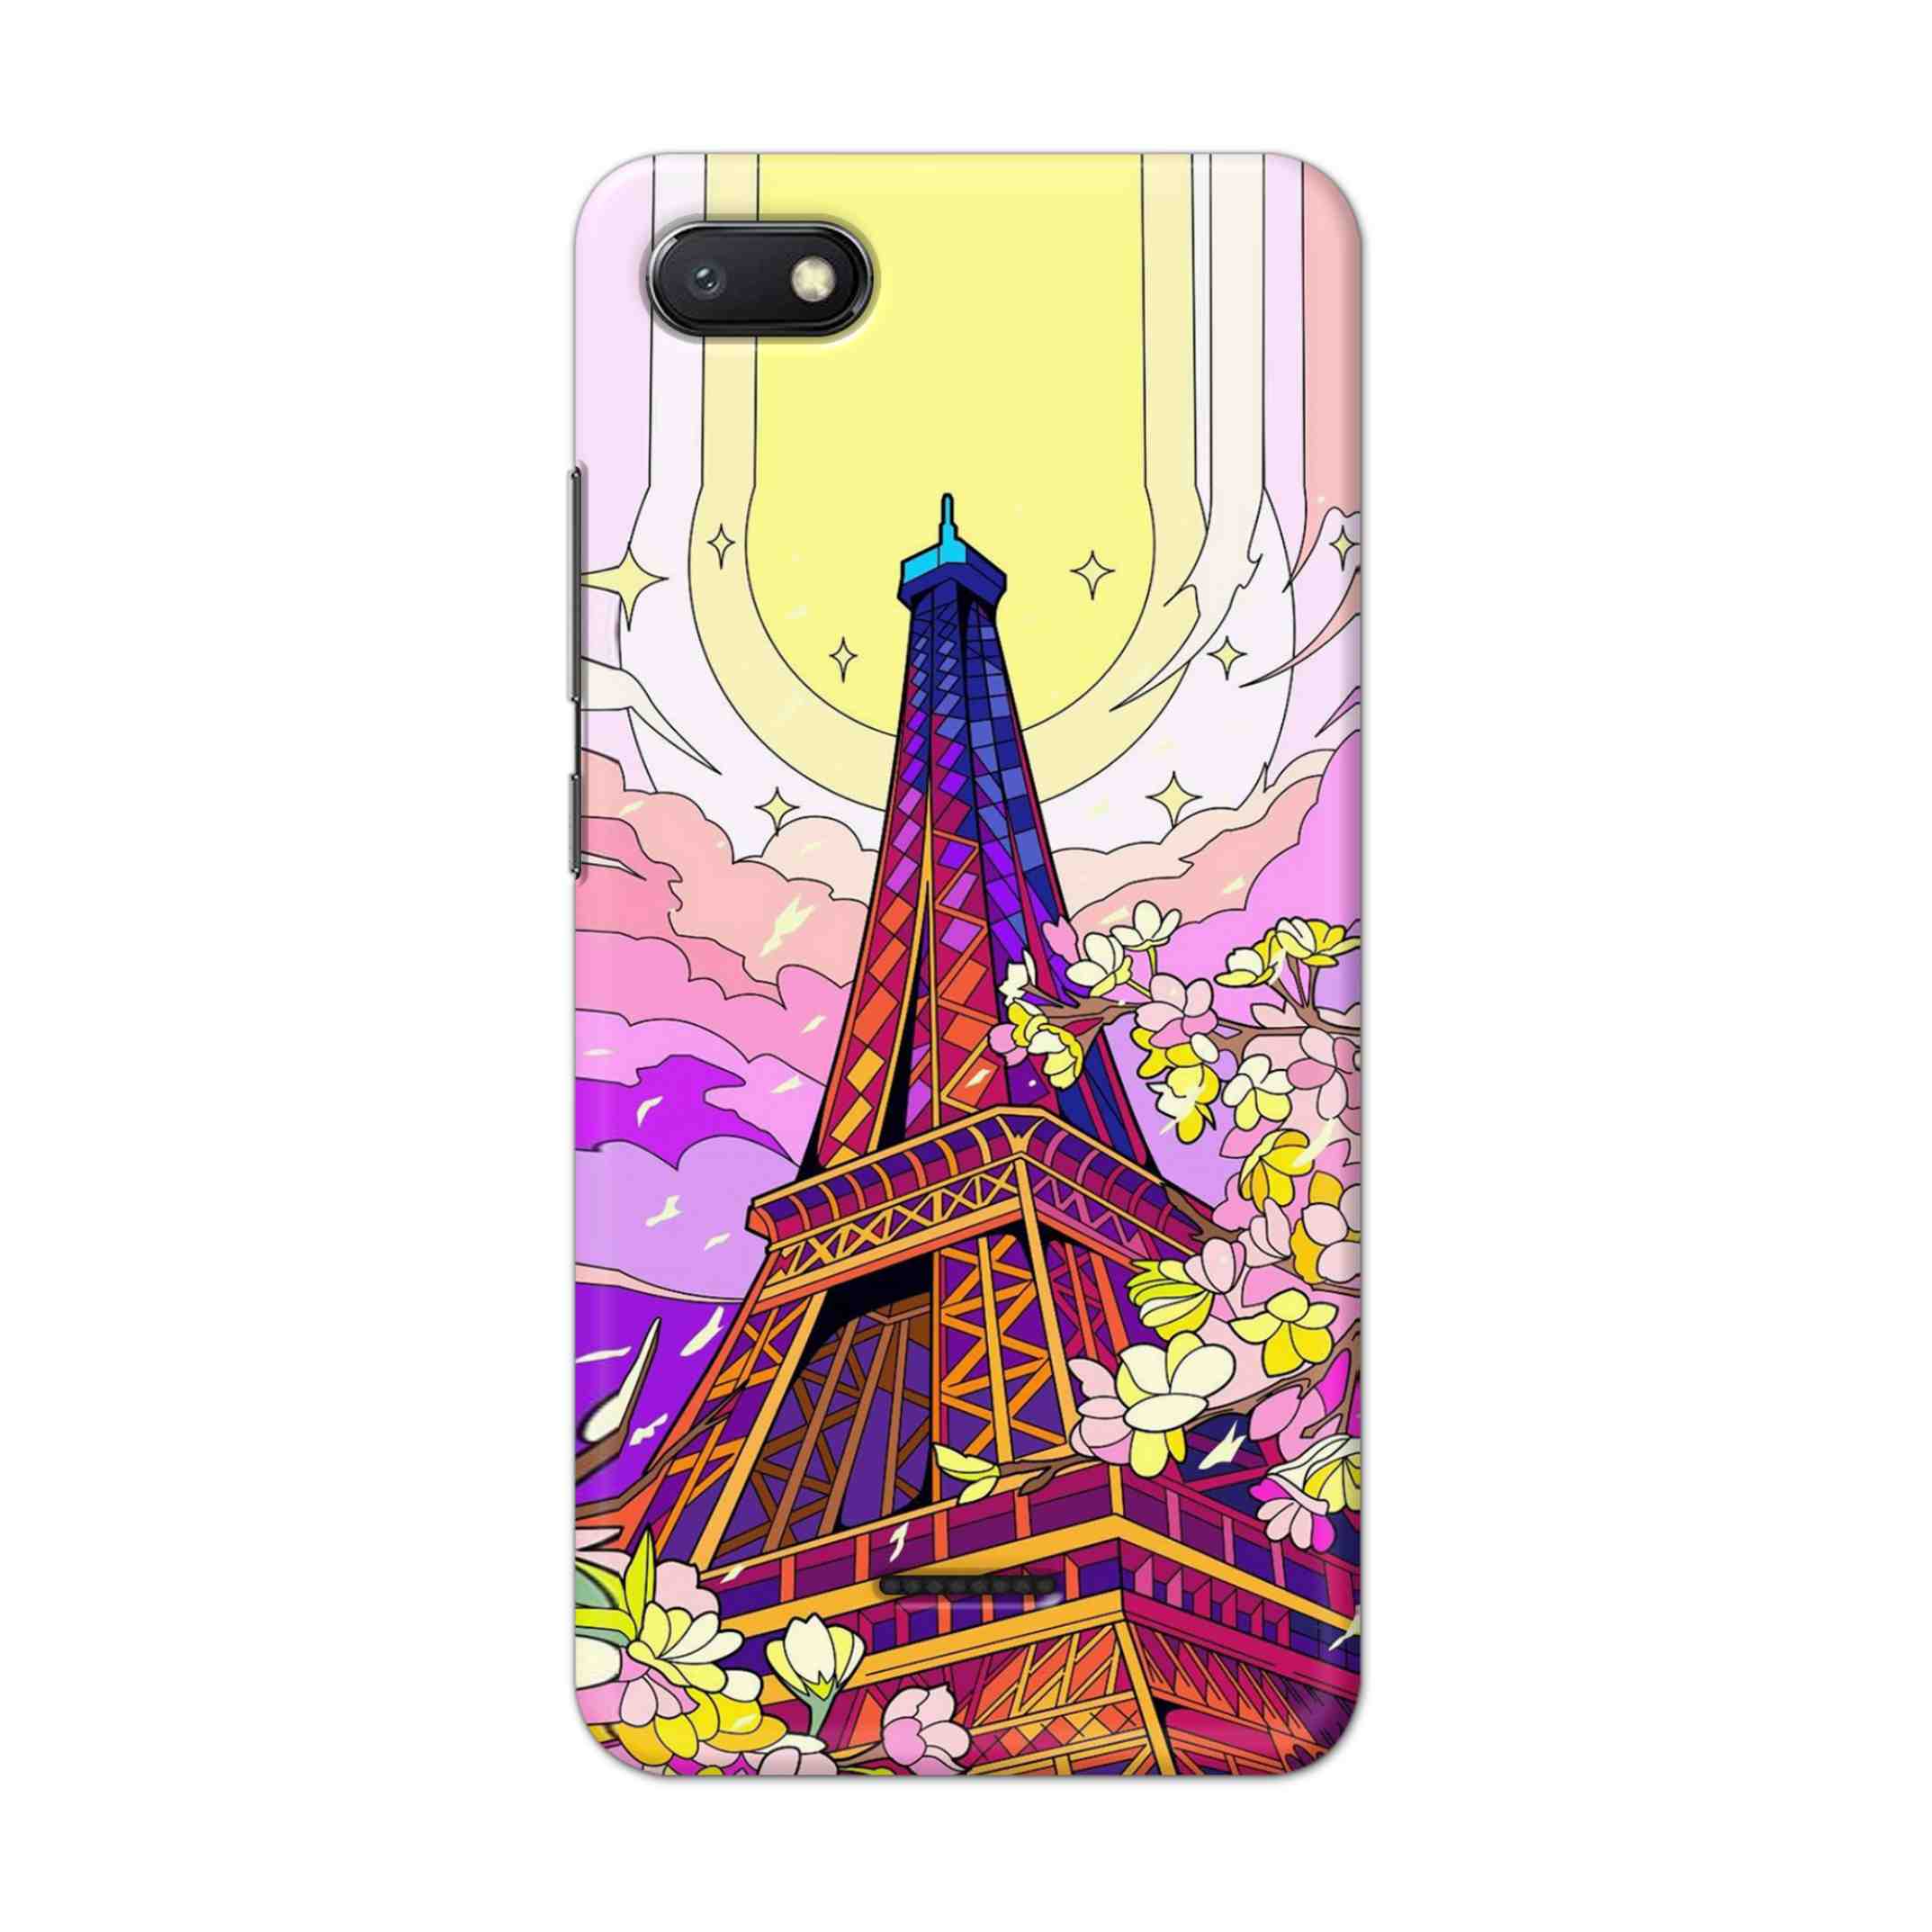 Buy Eiffl Tower Hard Back Mobile Phone Case/Cover For Xiaomi Redmi 6A Online